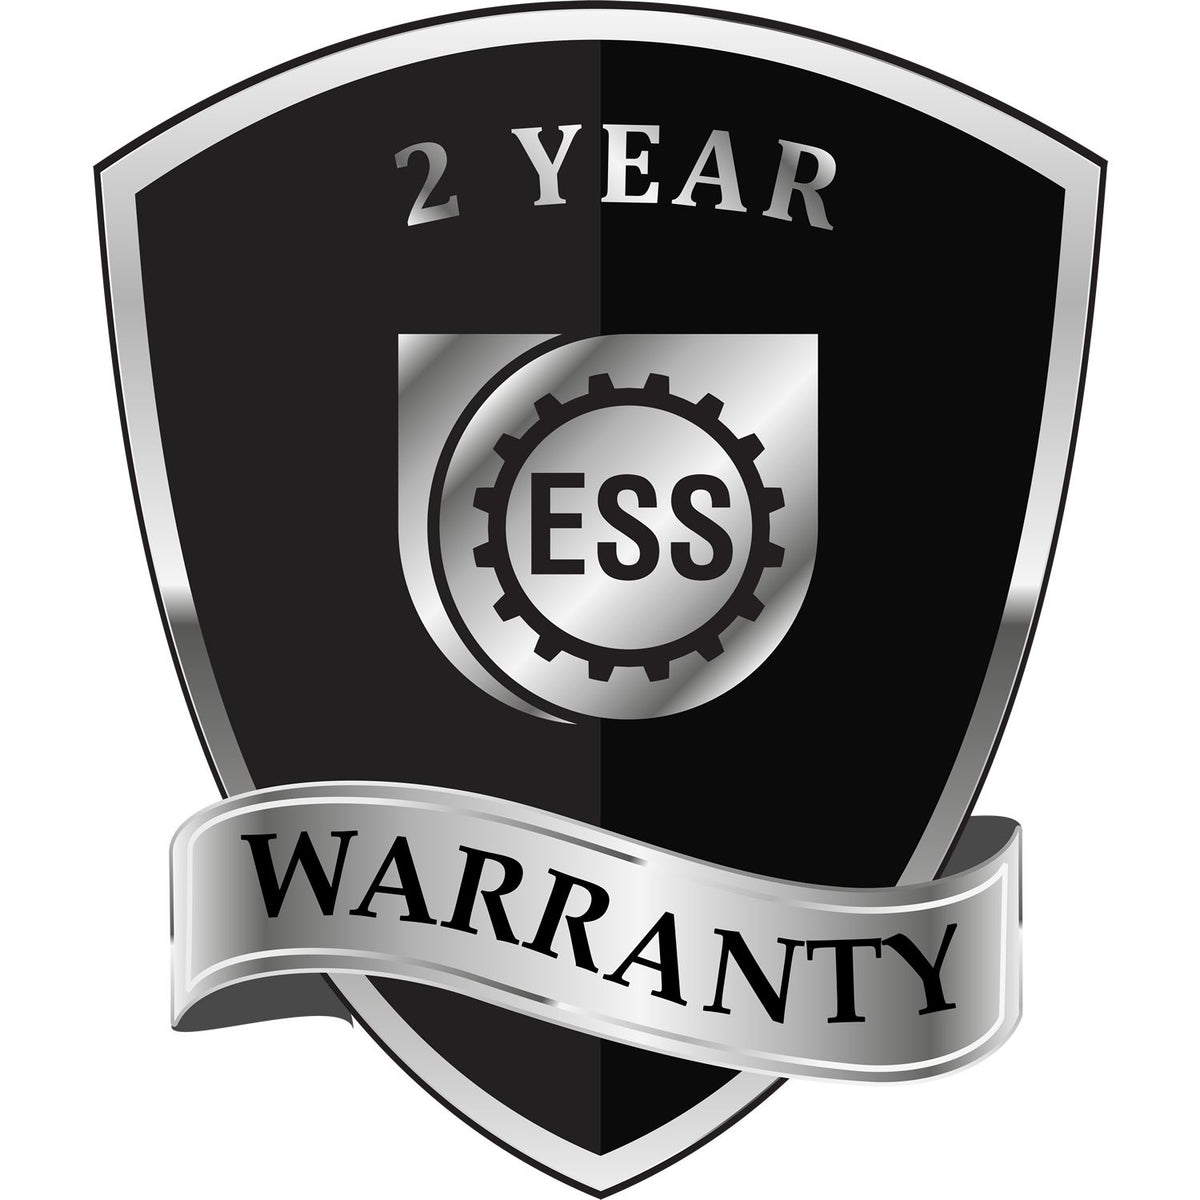 A black and silver badge or emblem showing warranty information for the State of District of Columbia Extended Long Reach Geologist Seal